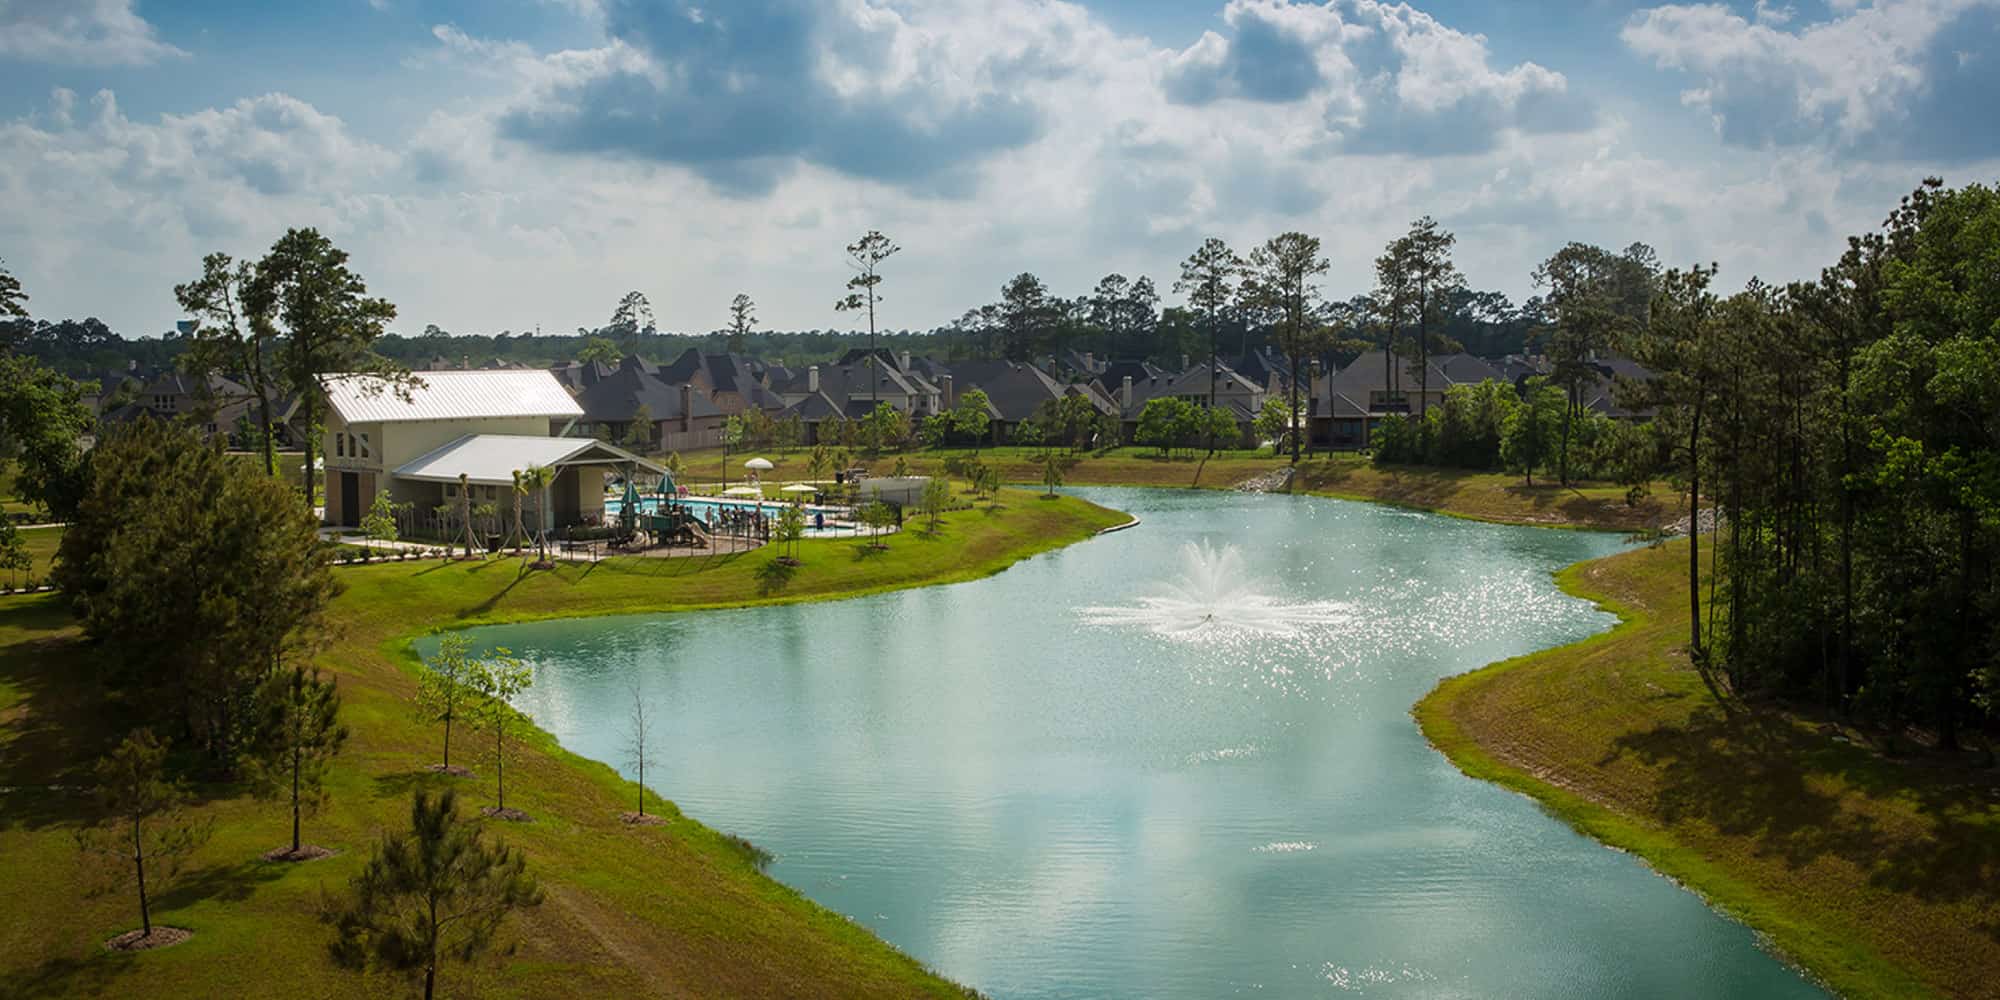 Commercial property development at Harper's Preserve in Conroe, TX